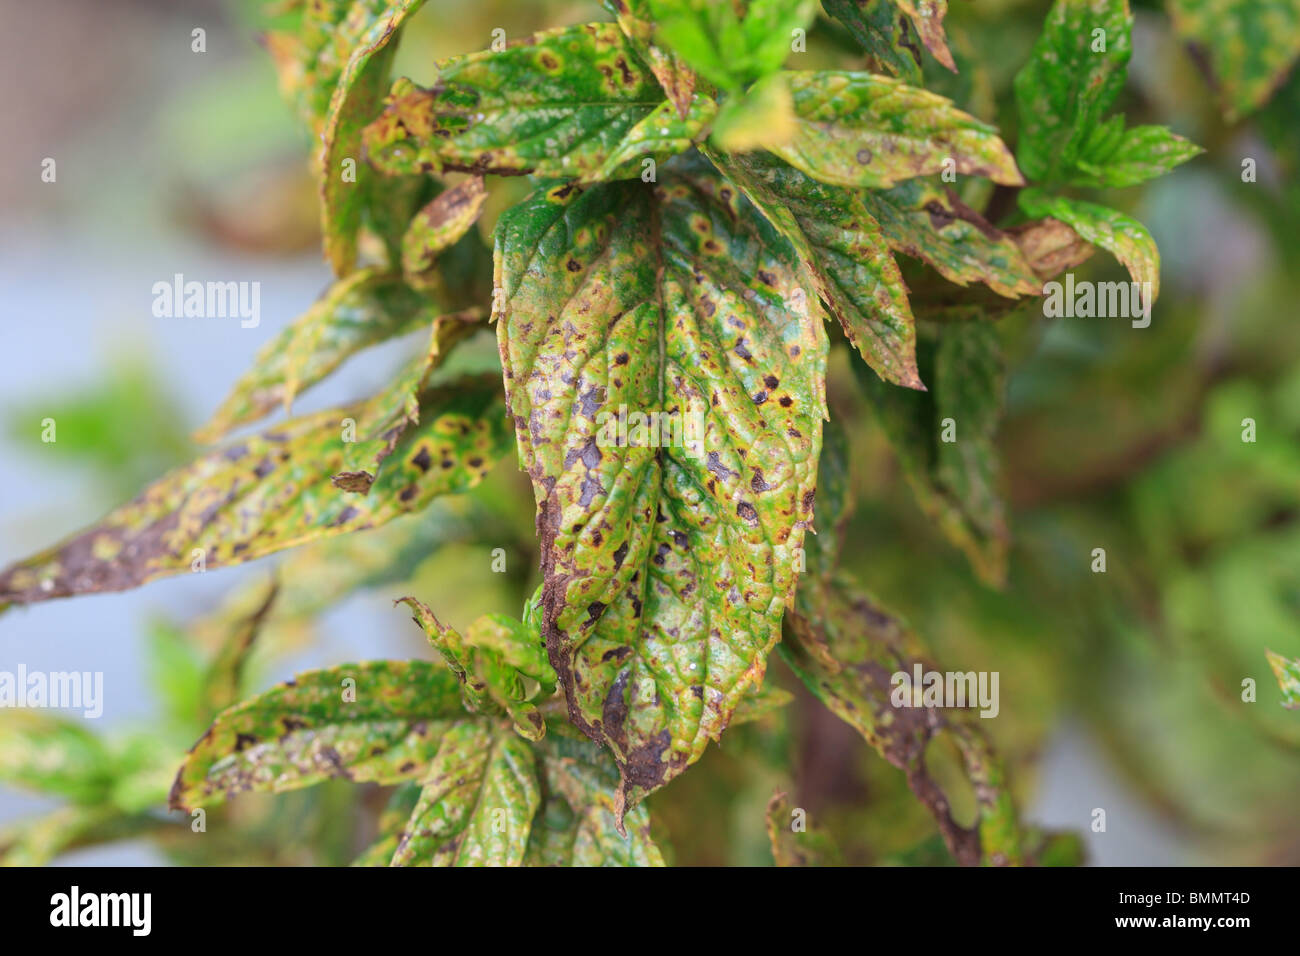 MINT RUST (Puccinia menthae) PLANT SHOWING SIGNS OF ATTACK Stock Photo